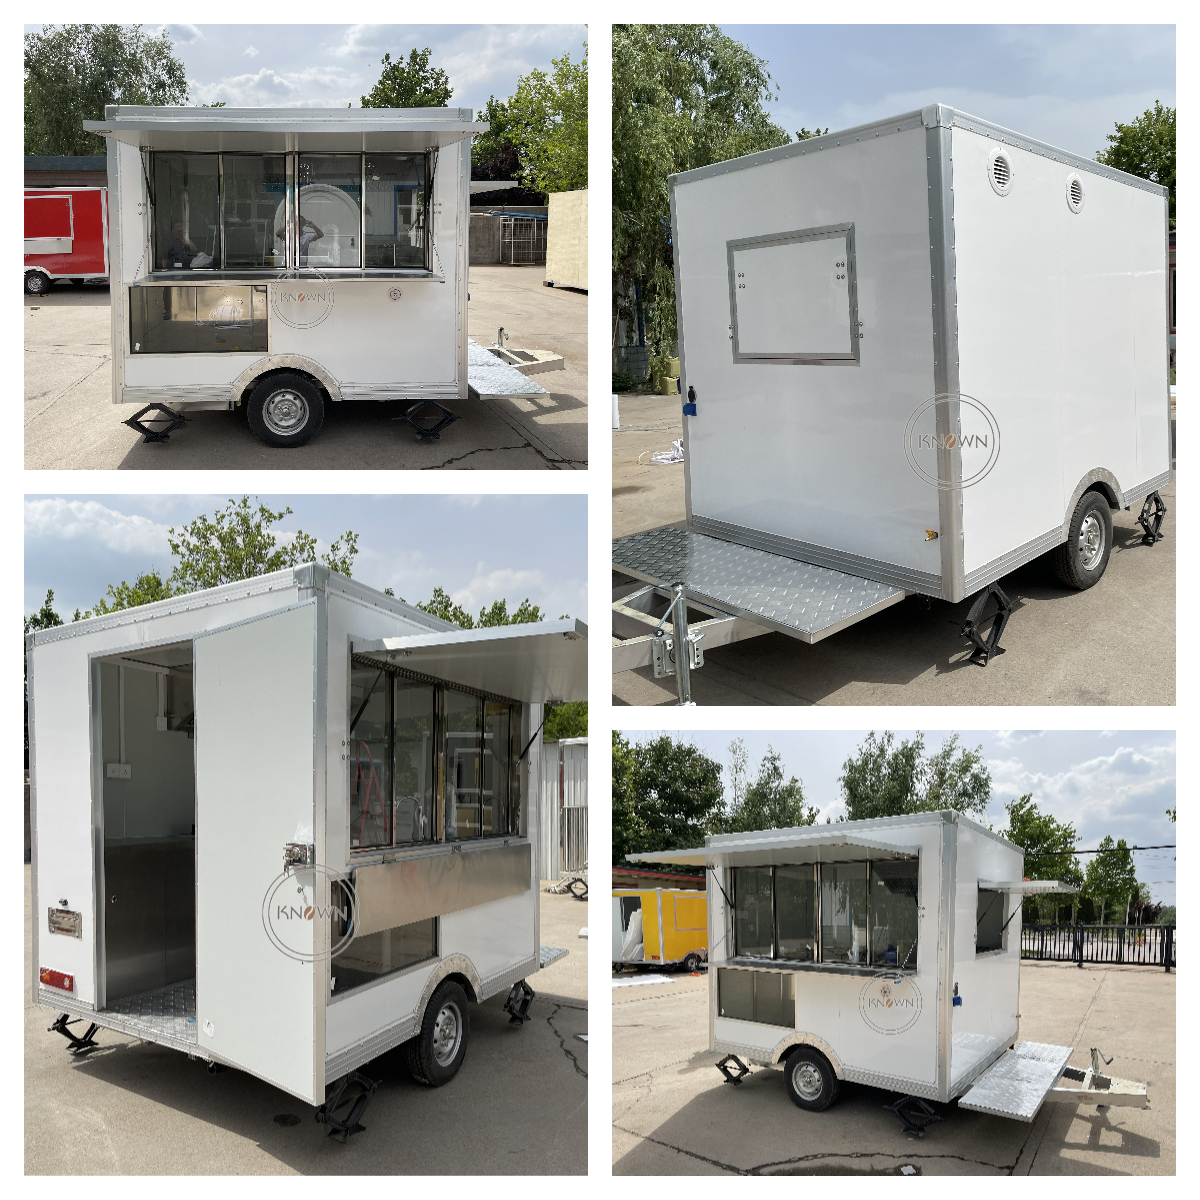 KN-FSH-250 Mobile Food Trucks For Sale CE DOT Certified Exhibition Trailer Catering Trailers Or Mobile Food Trucks